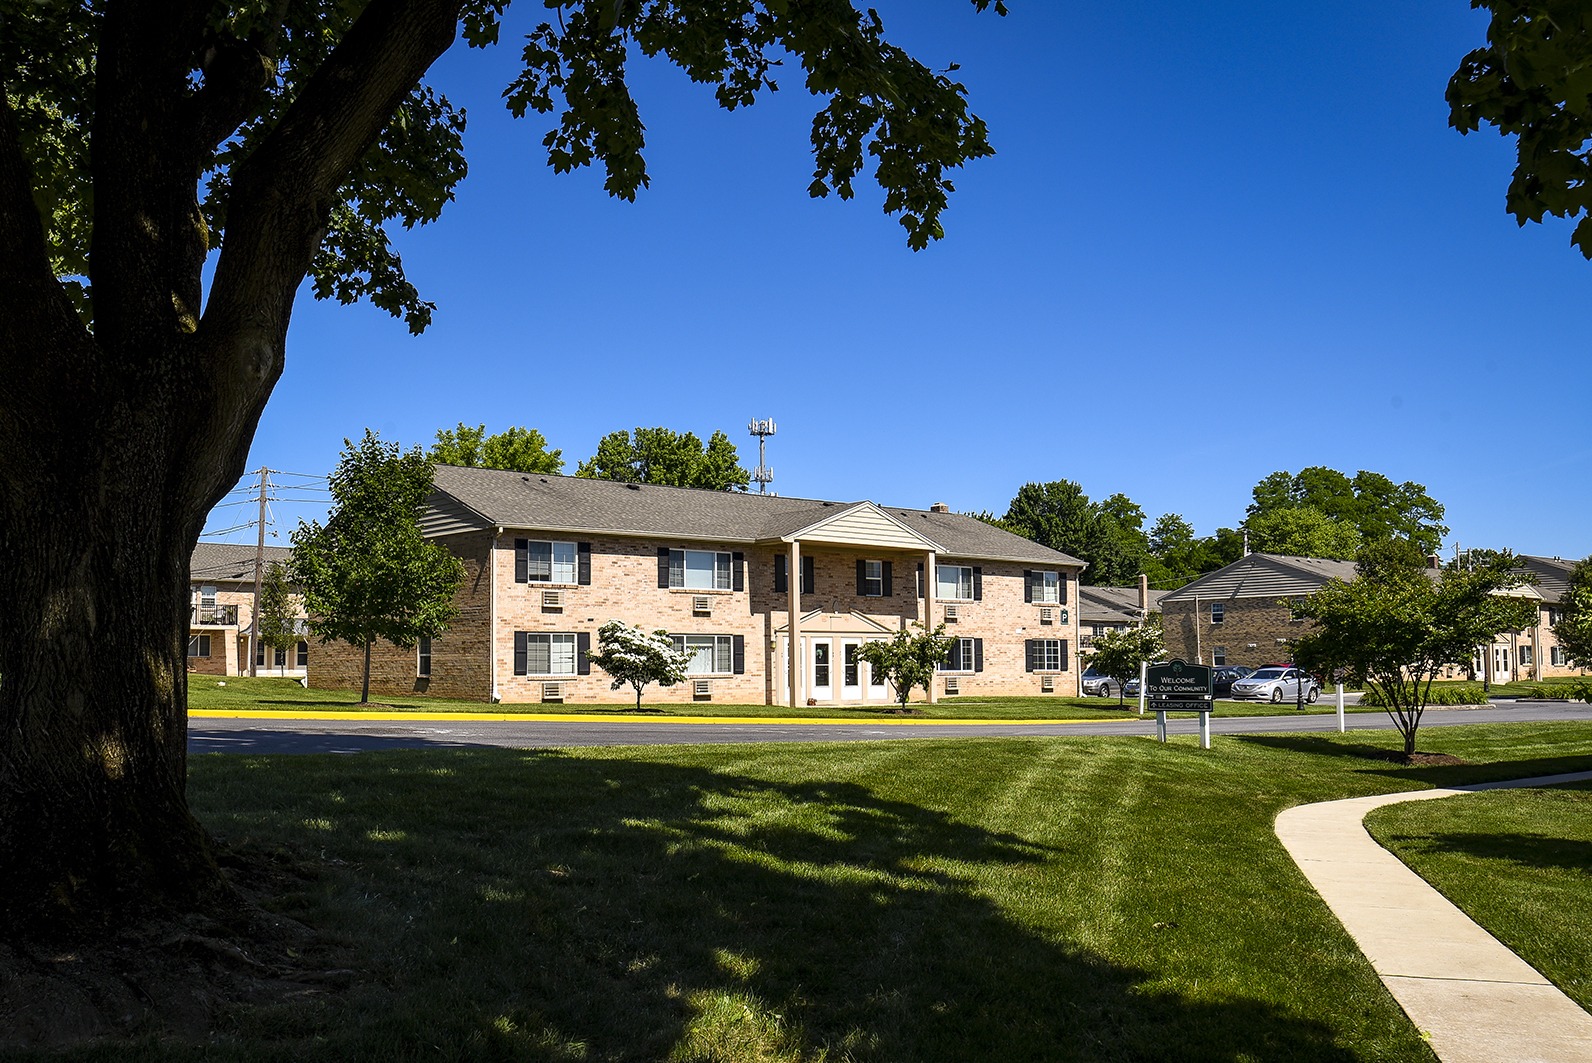 Lawn and exterior of Woodland Plaza Wyomissing apartments with a shaded lawwn in front